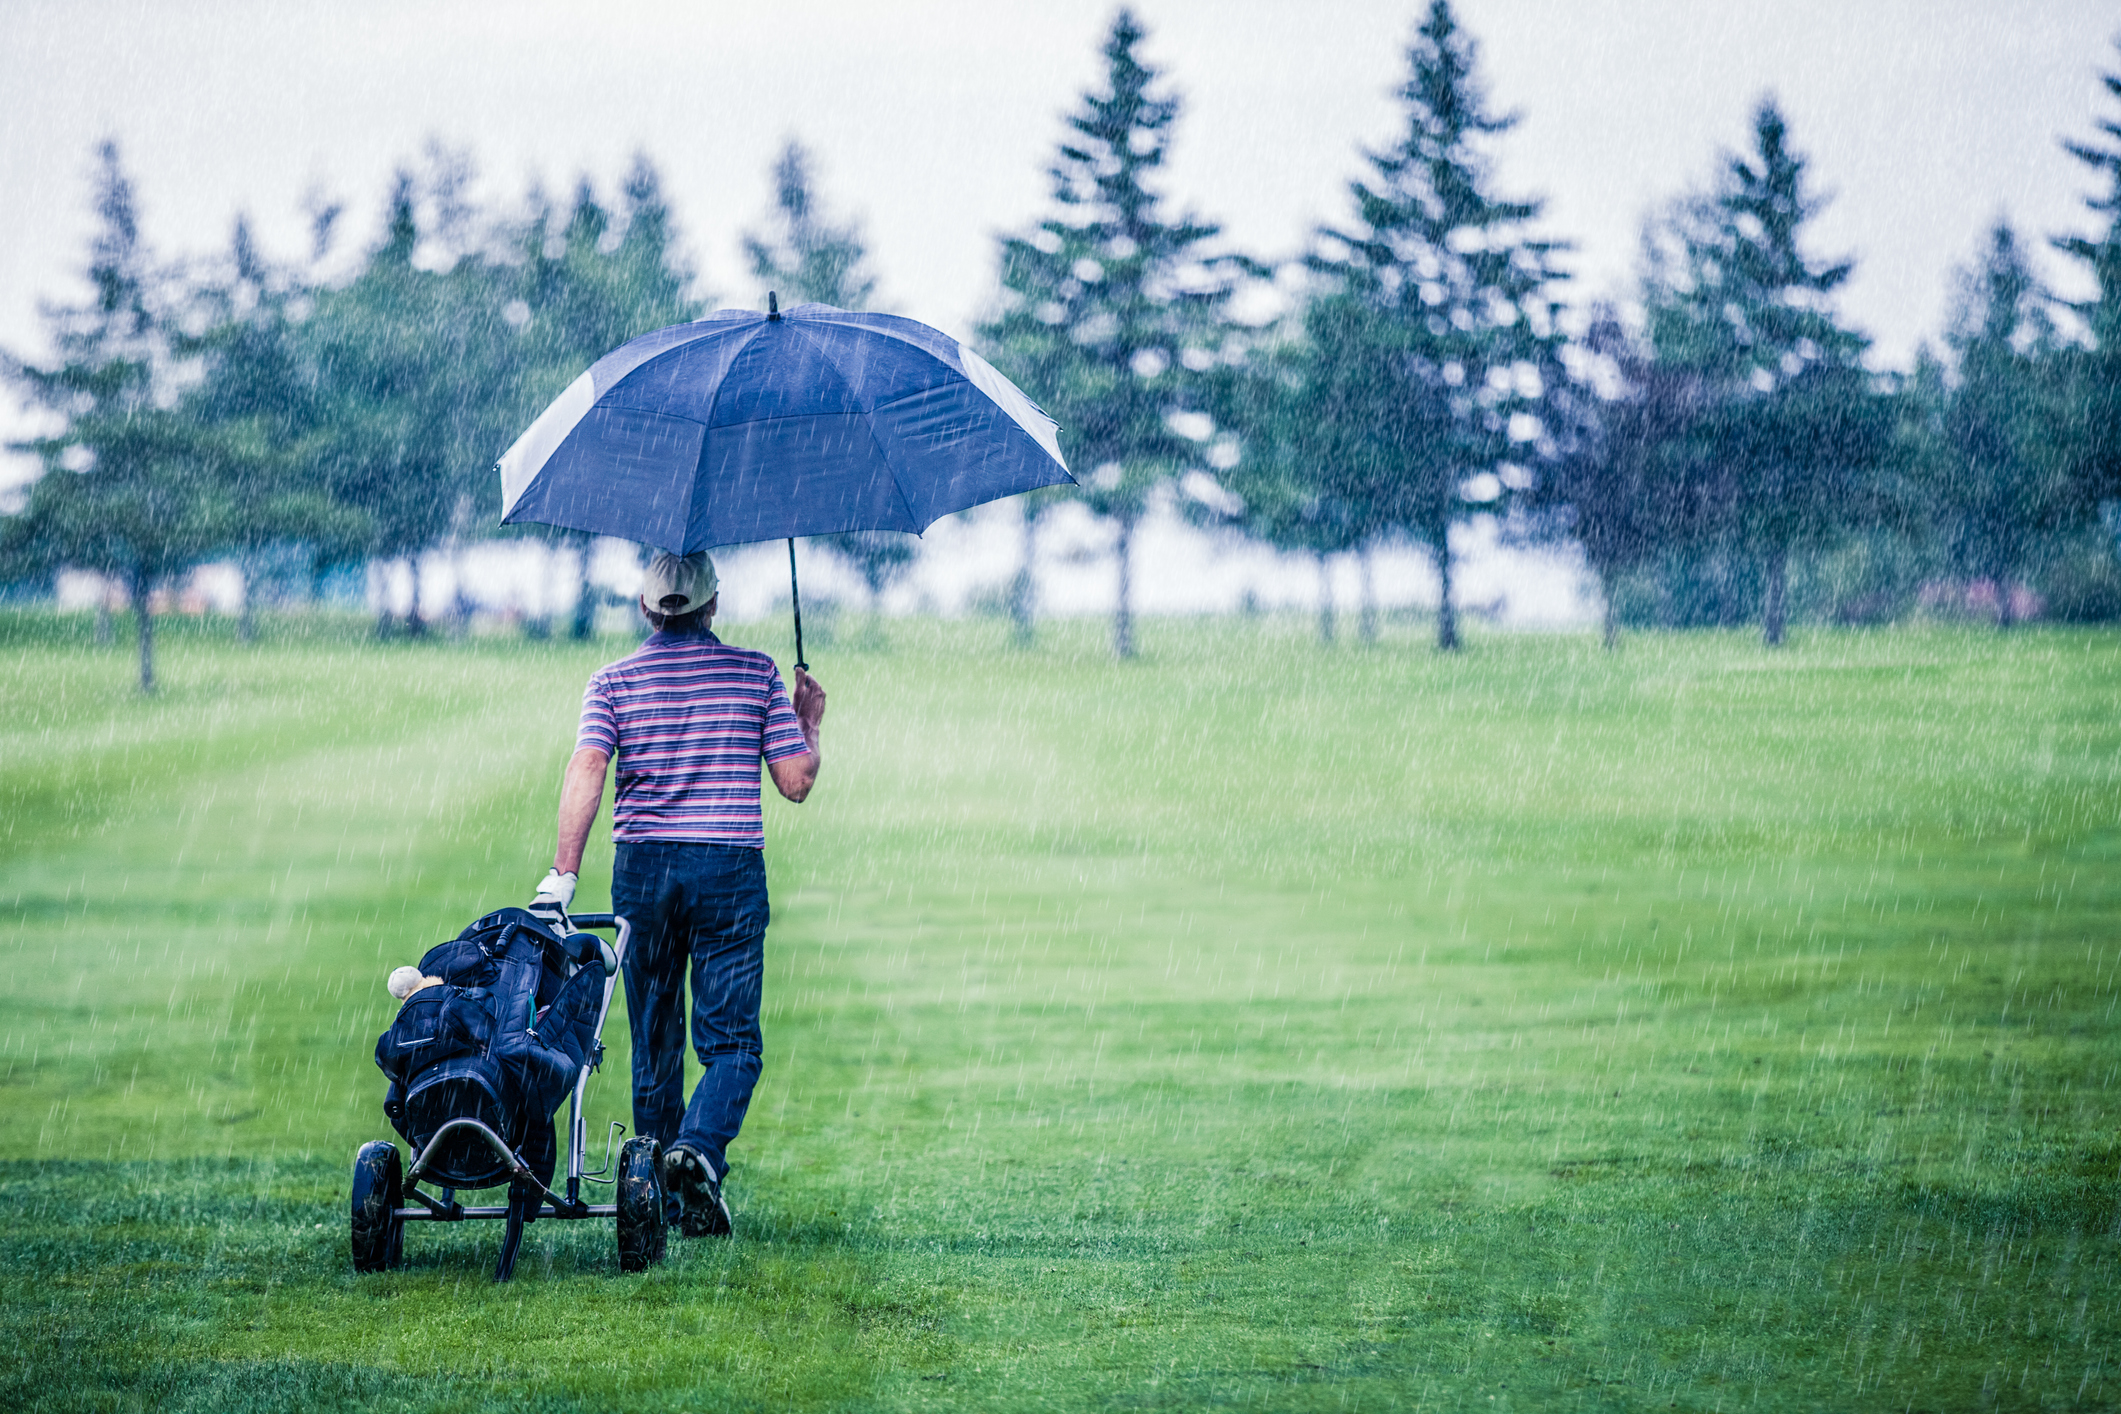 Man holding an umbrella in the rain while walking on a golf course.